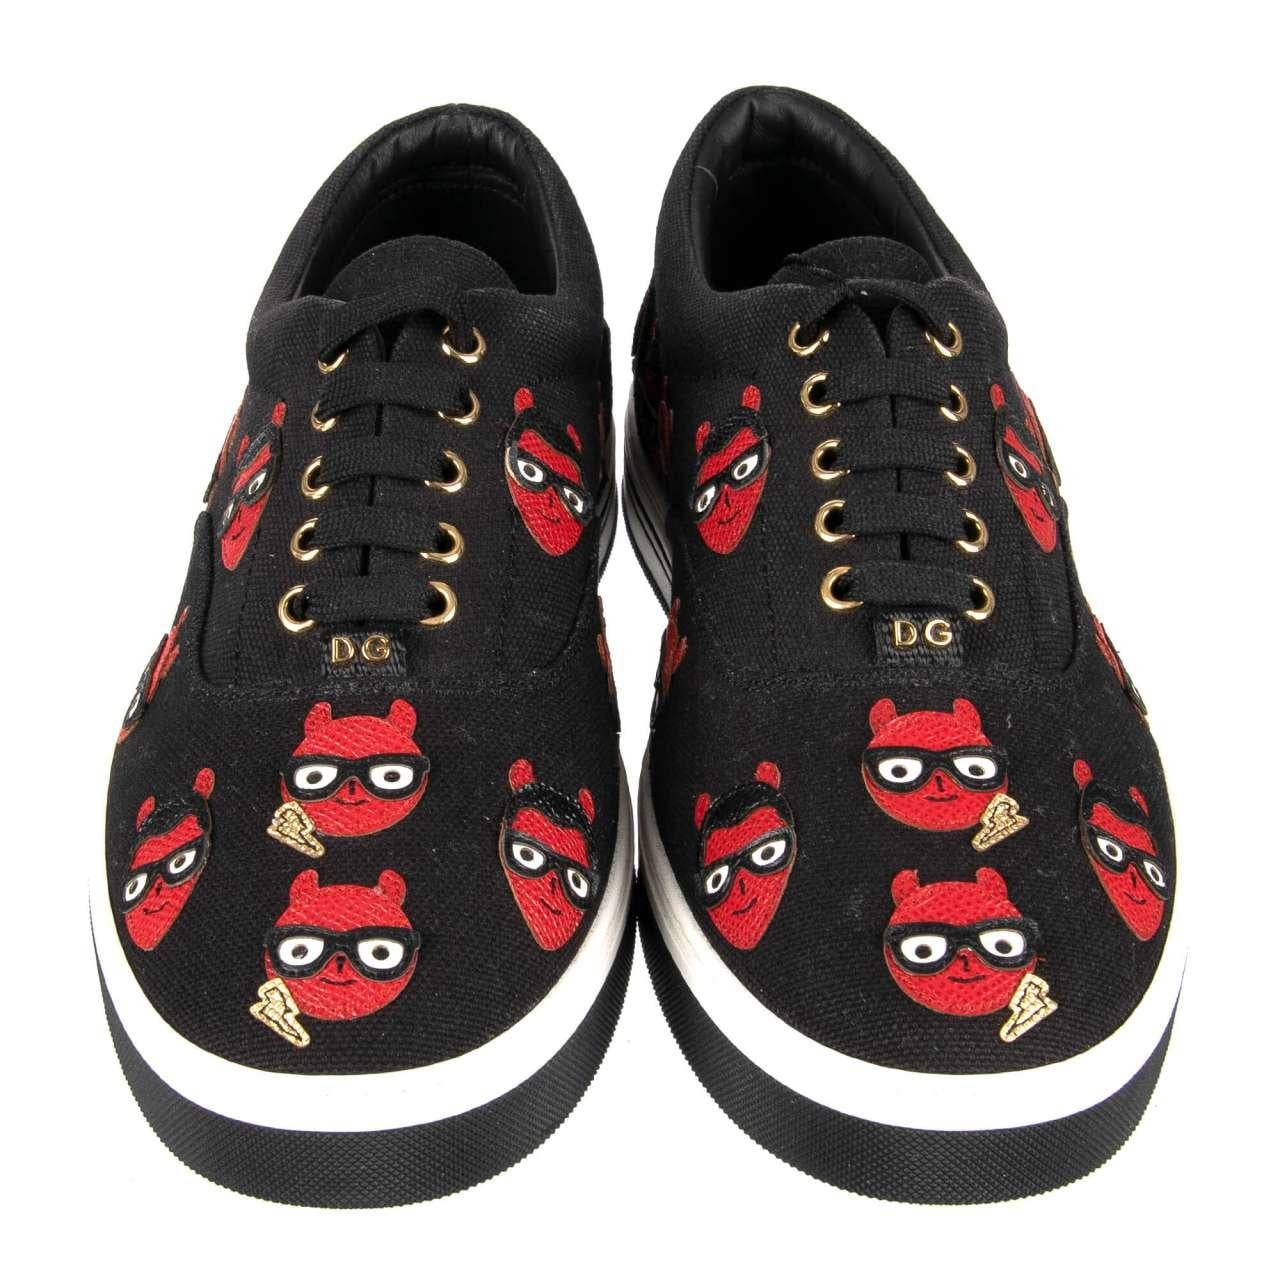 D&G Low-Top Canvas Sneaker ROMA with Leather Embroidery Black EUR 41.5 For Sale 2